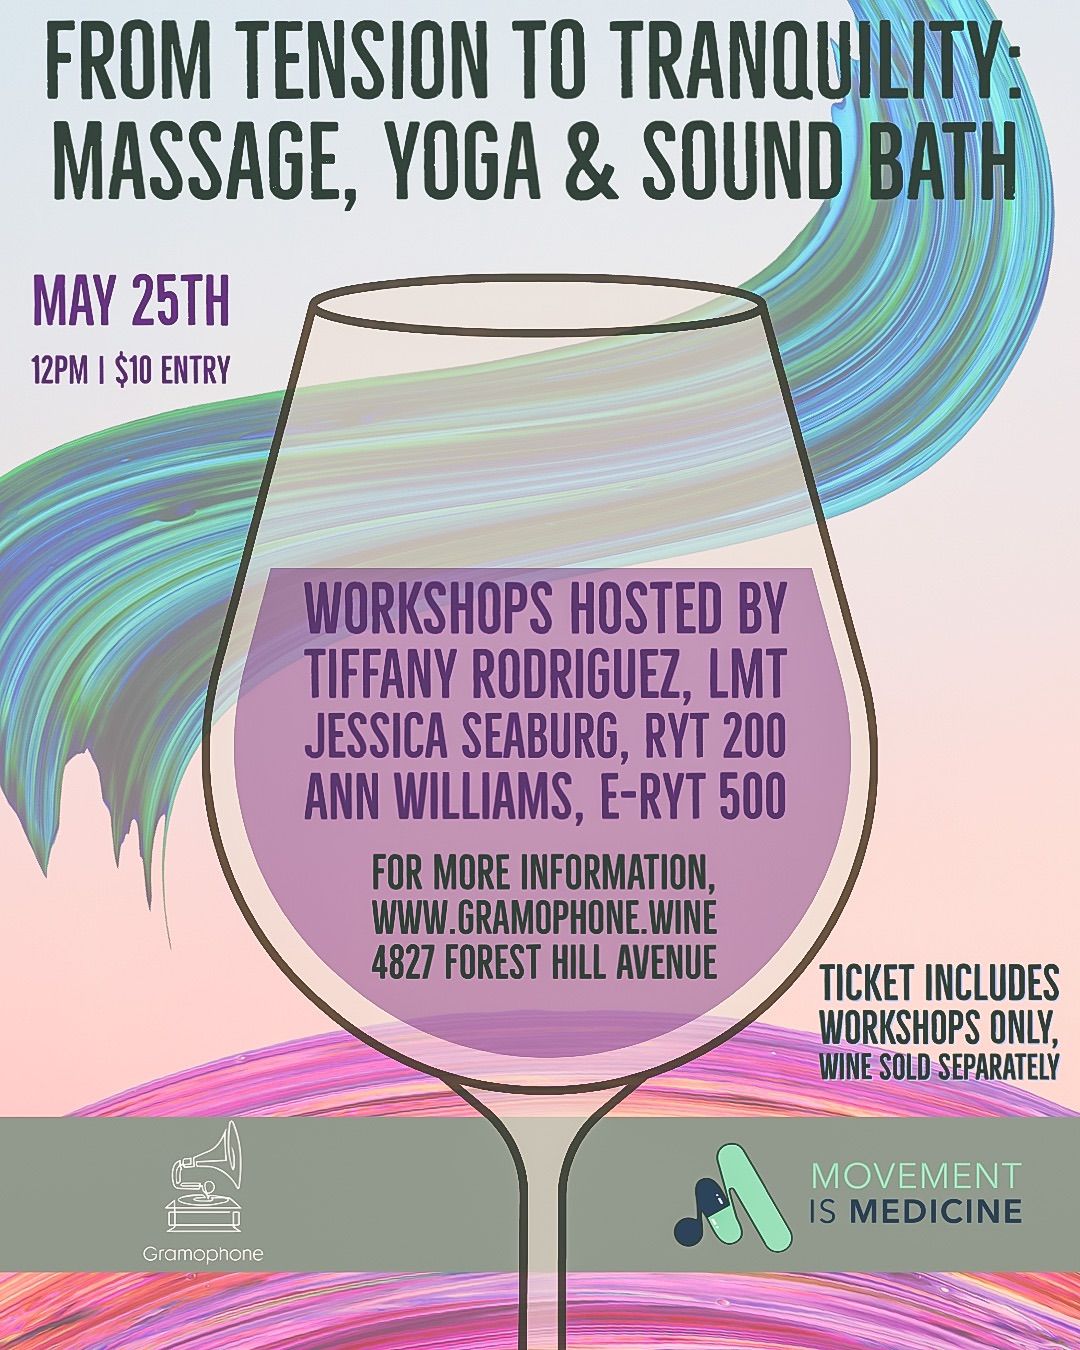 From Tension to Tranquility: Massage, Yoga & Sound Bath